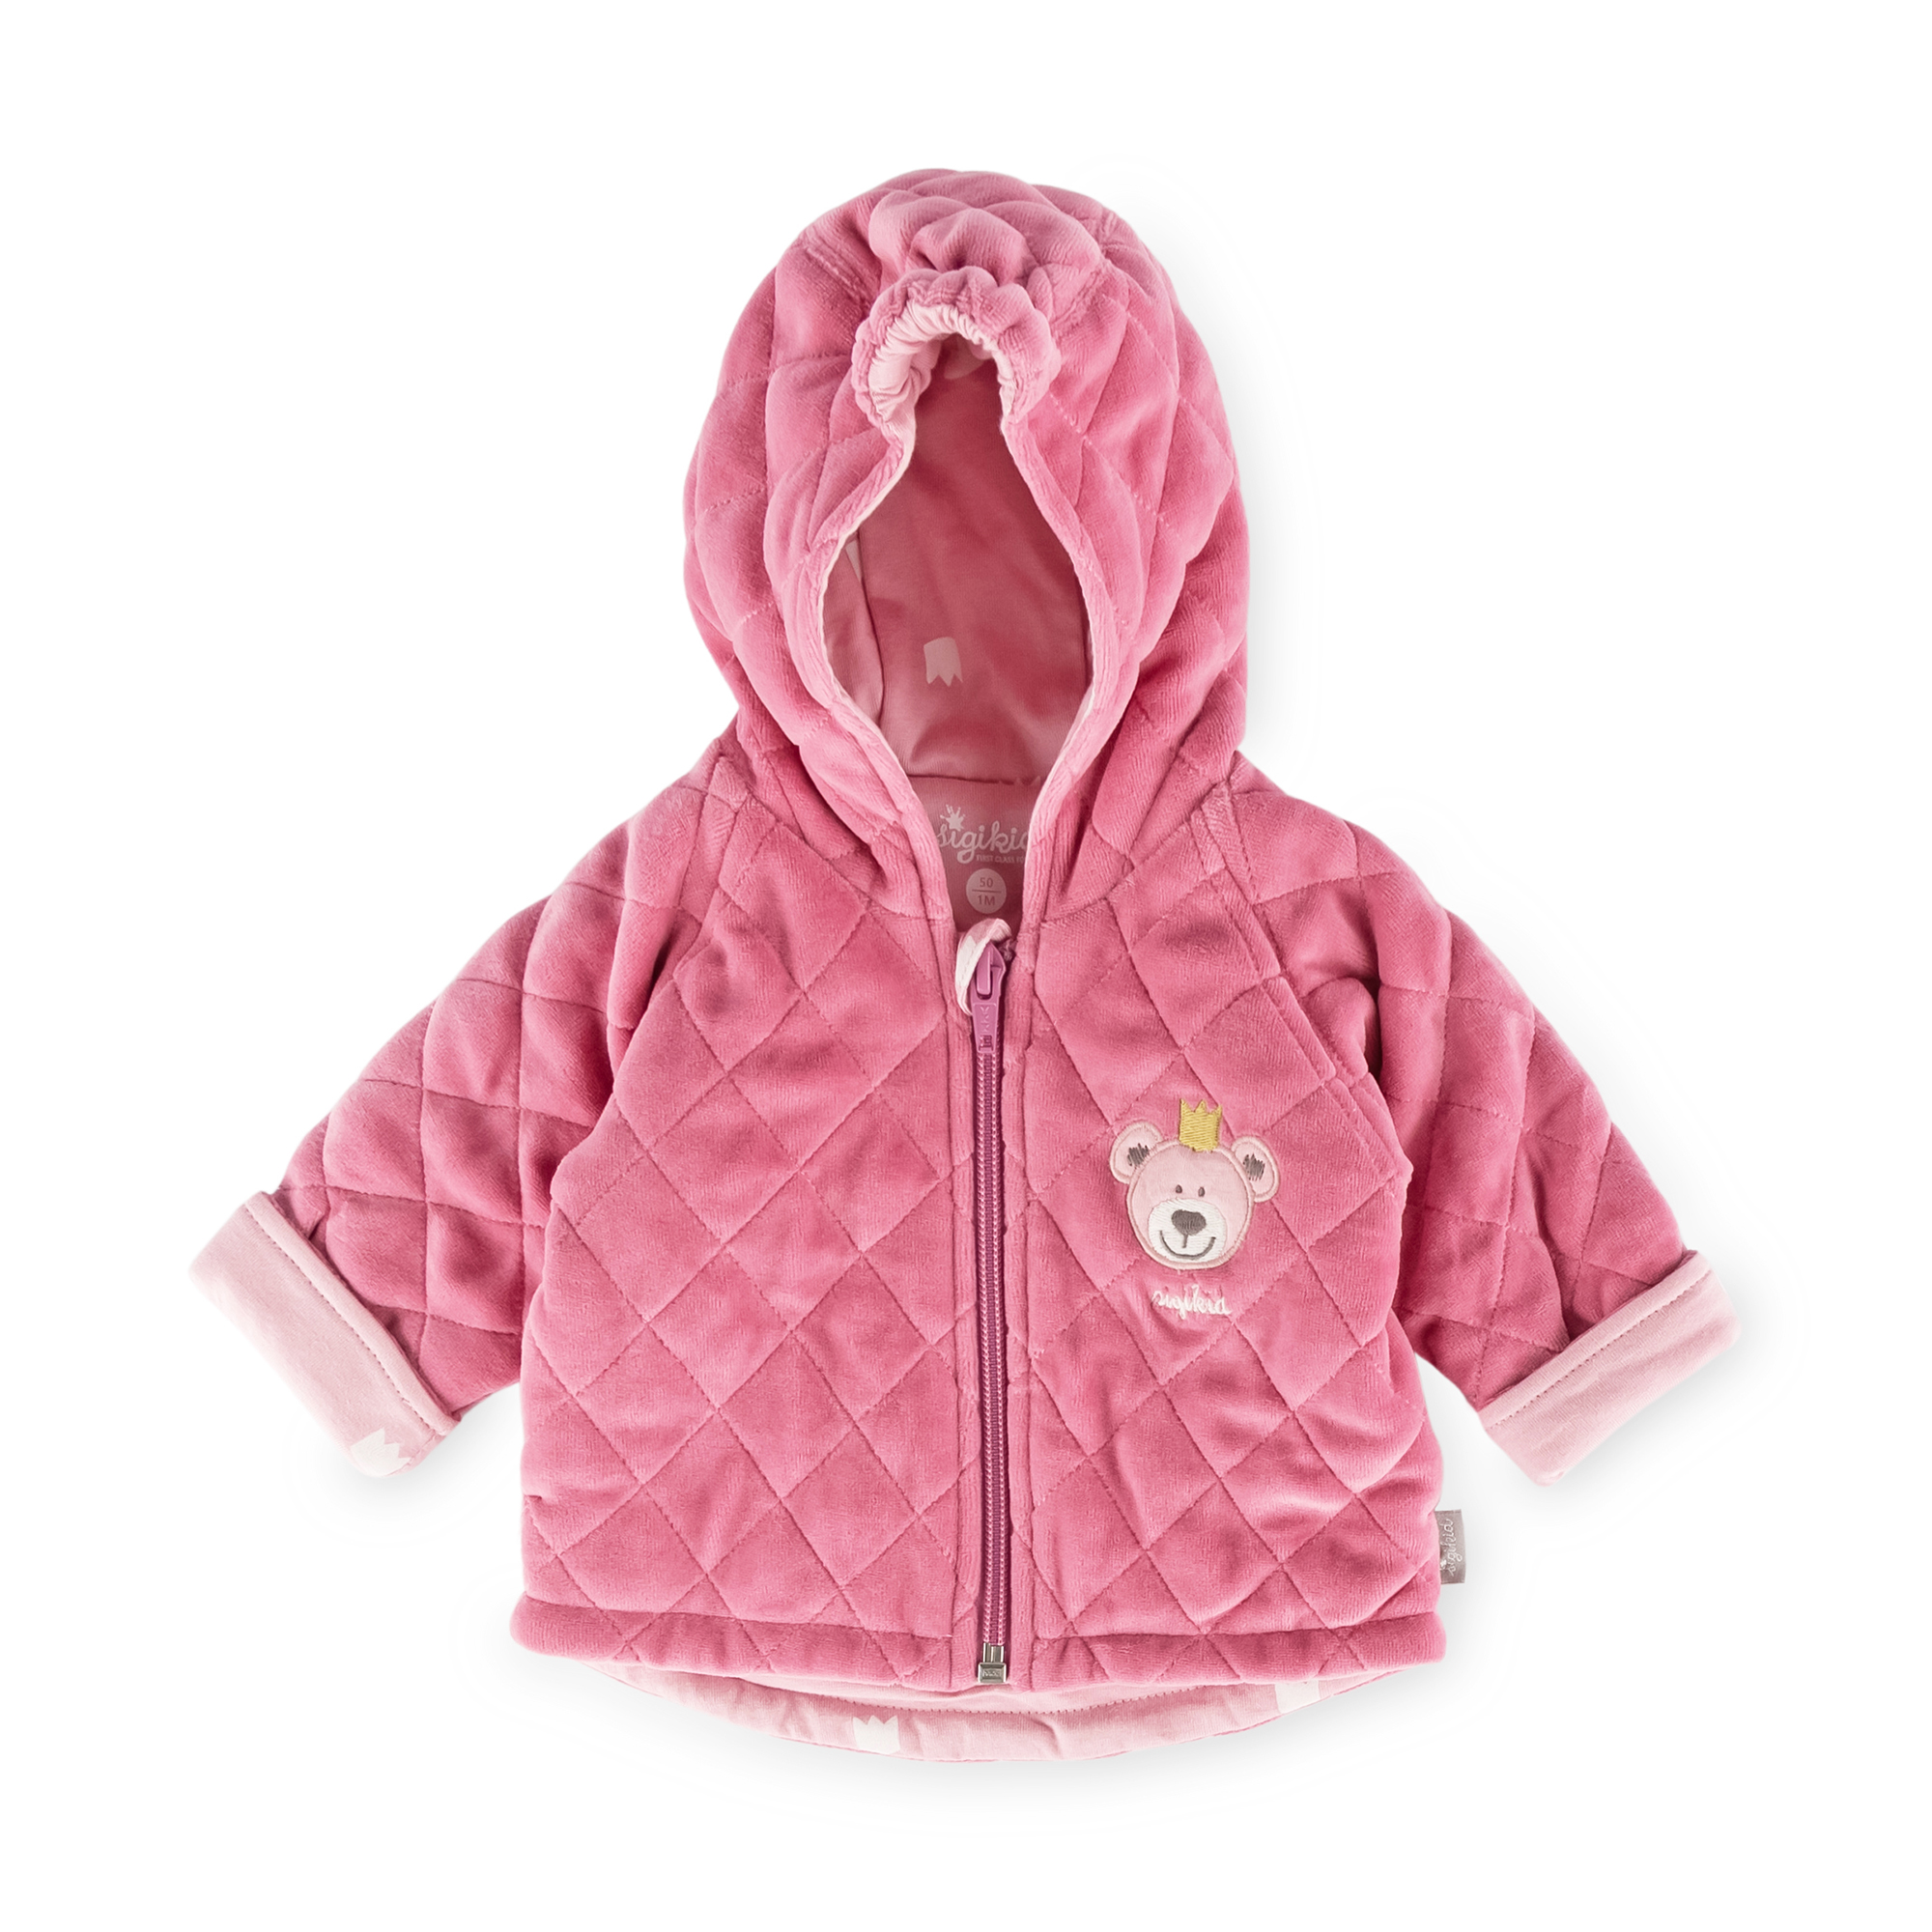 Newborn baby hooded velour jacket bear prince, pink, quilted